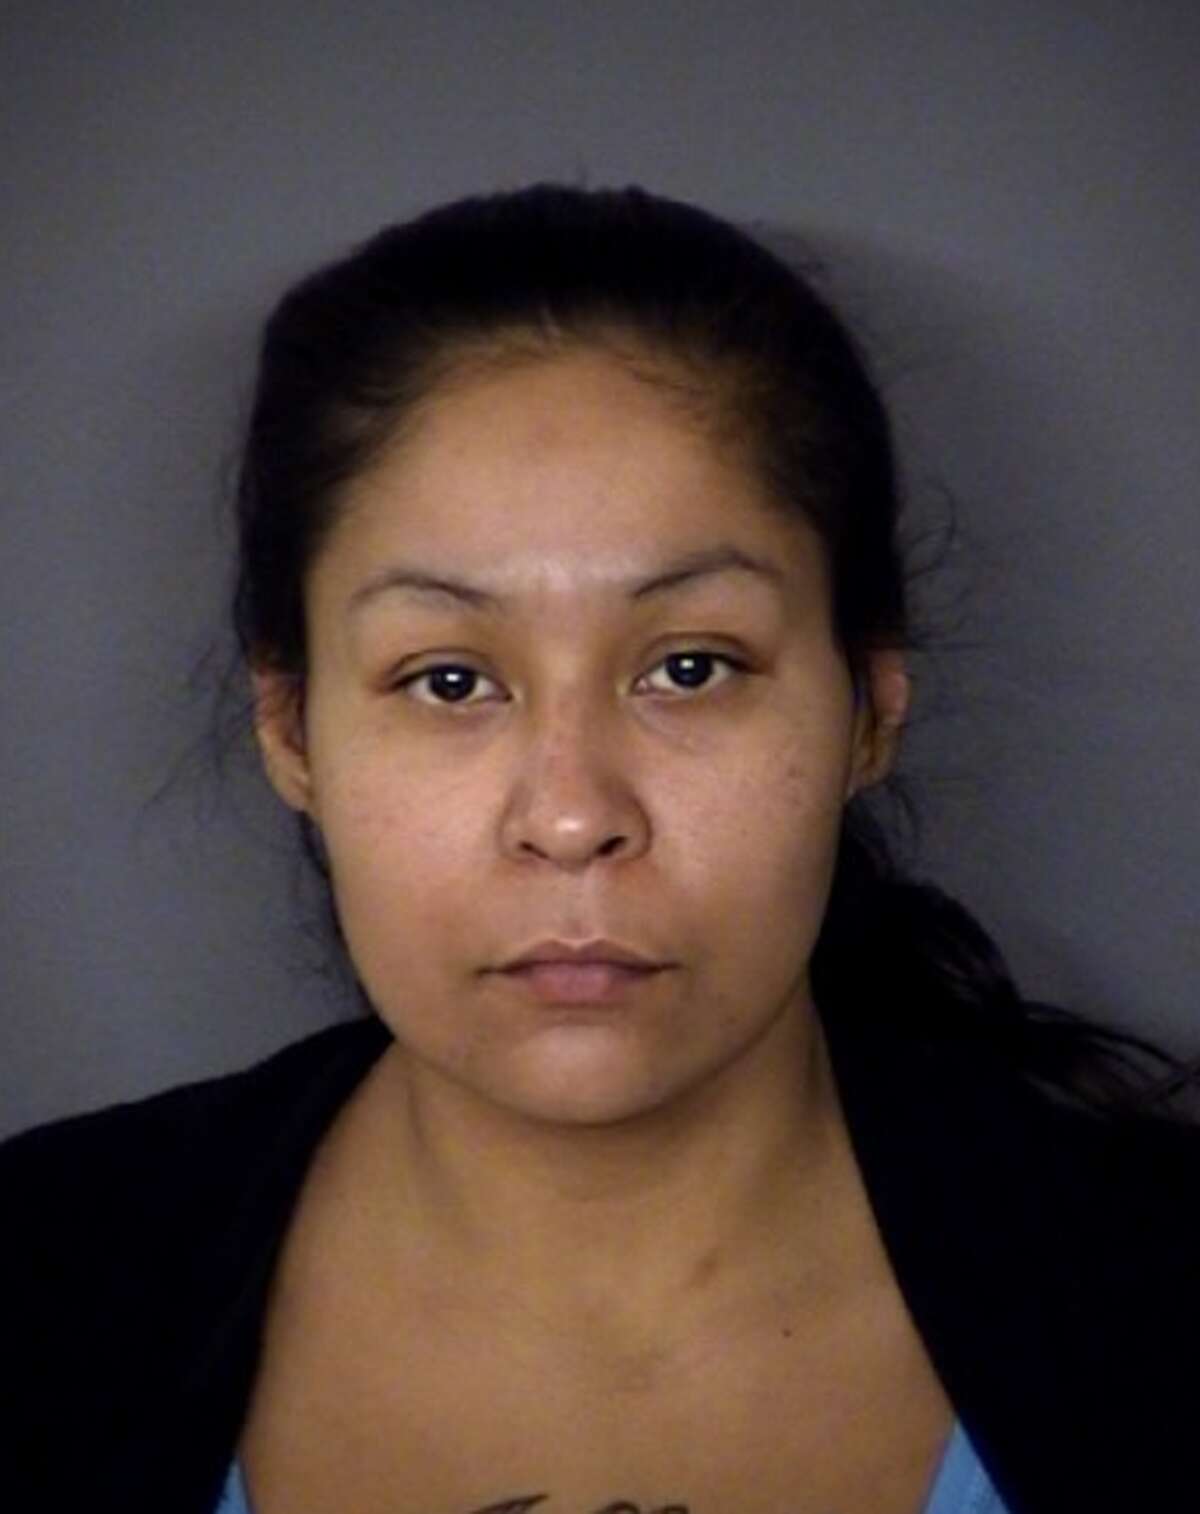 According to a police report, Jessica Ramona Gonzales's body was discovered around 1 a.m. on July 27 in an alley in the 3500 block of South Flores Street.